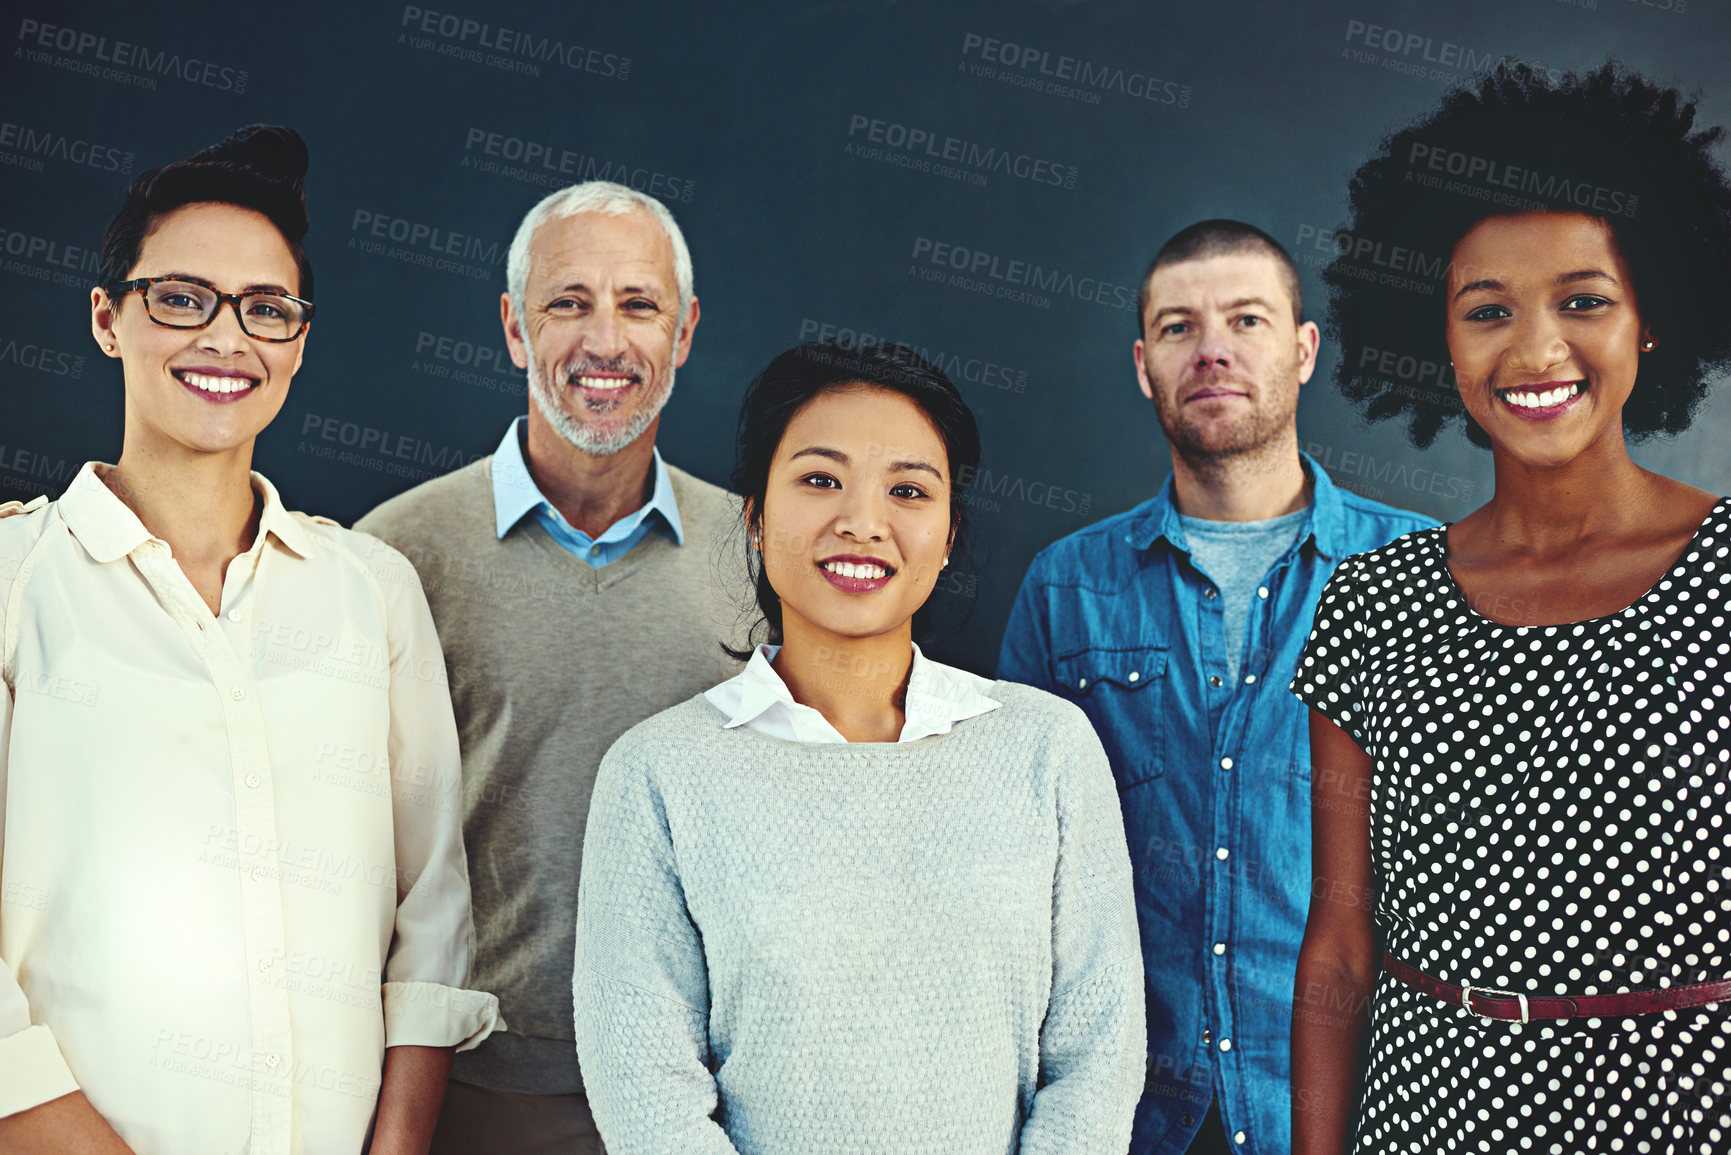 Buy stock photo Portrait of a diverse team of creative colleagues posing in the studio